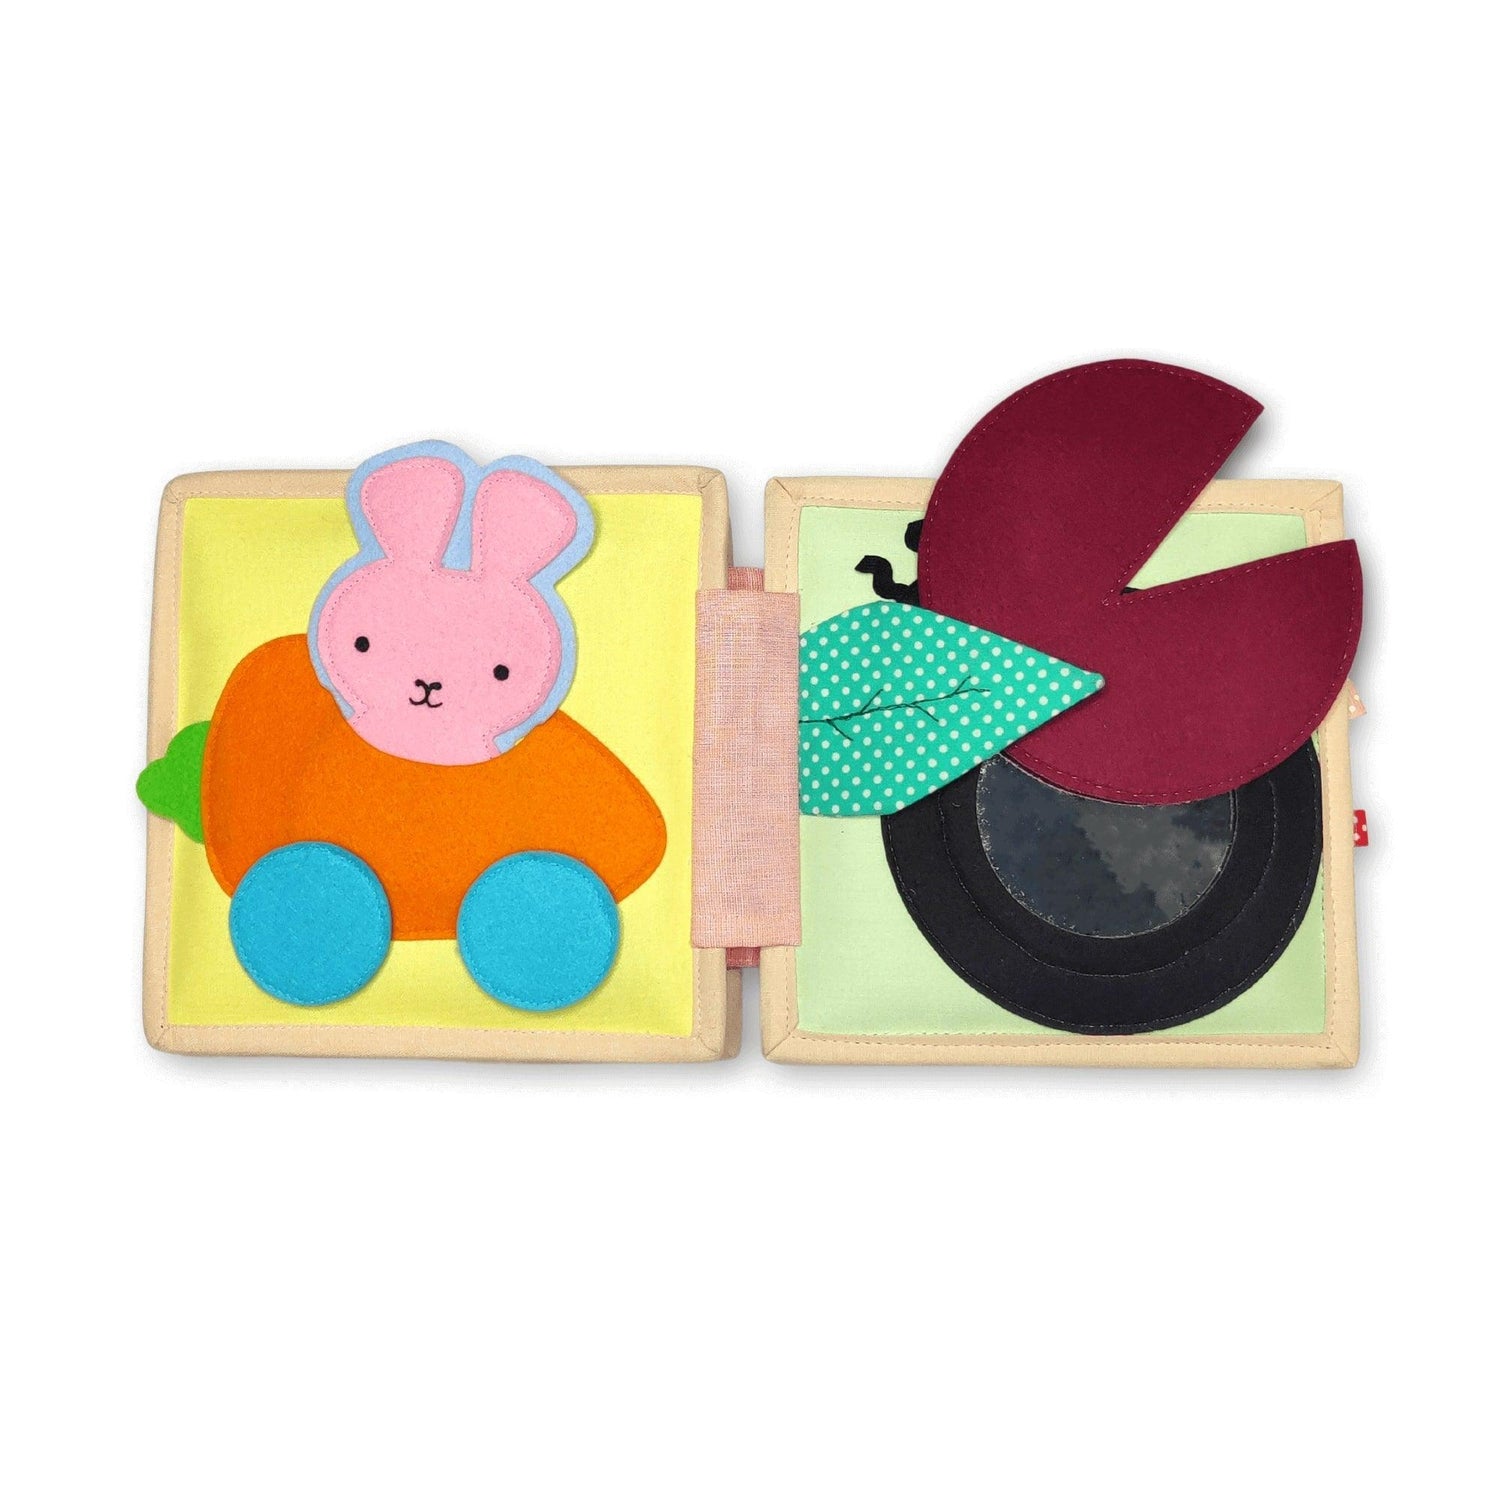 Quiet Book 'Flatternder Schmetterling' - The Little One • Family.Concept.Store. 